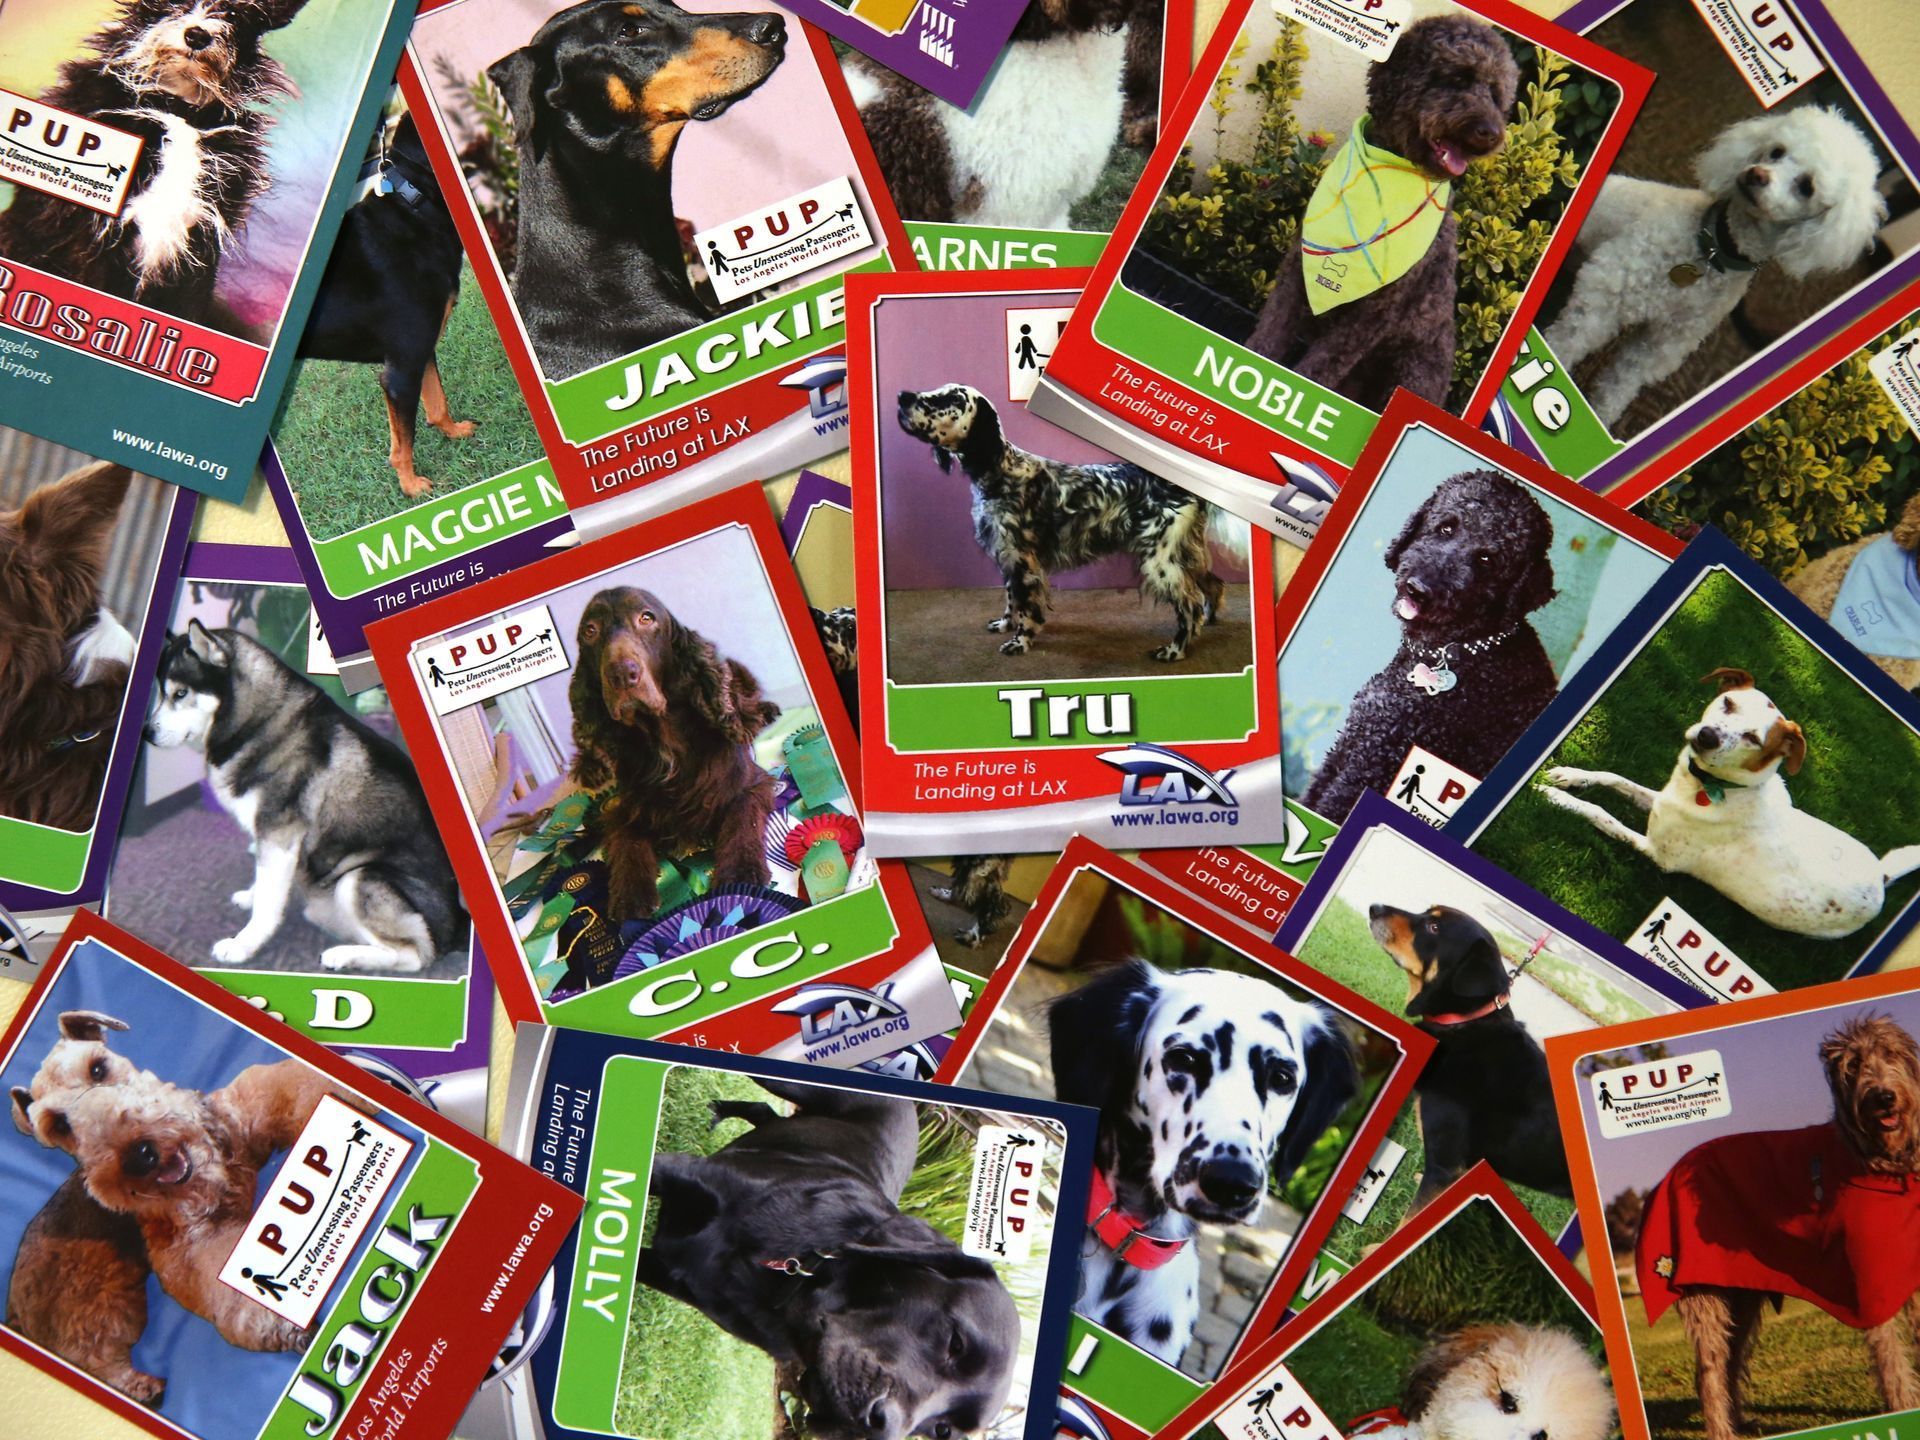 The LAX therapy dogs' business cards